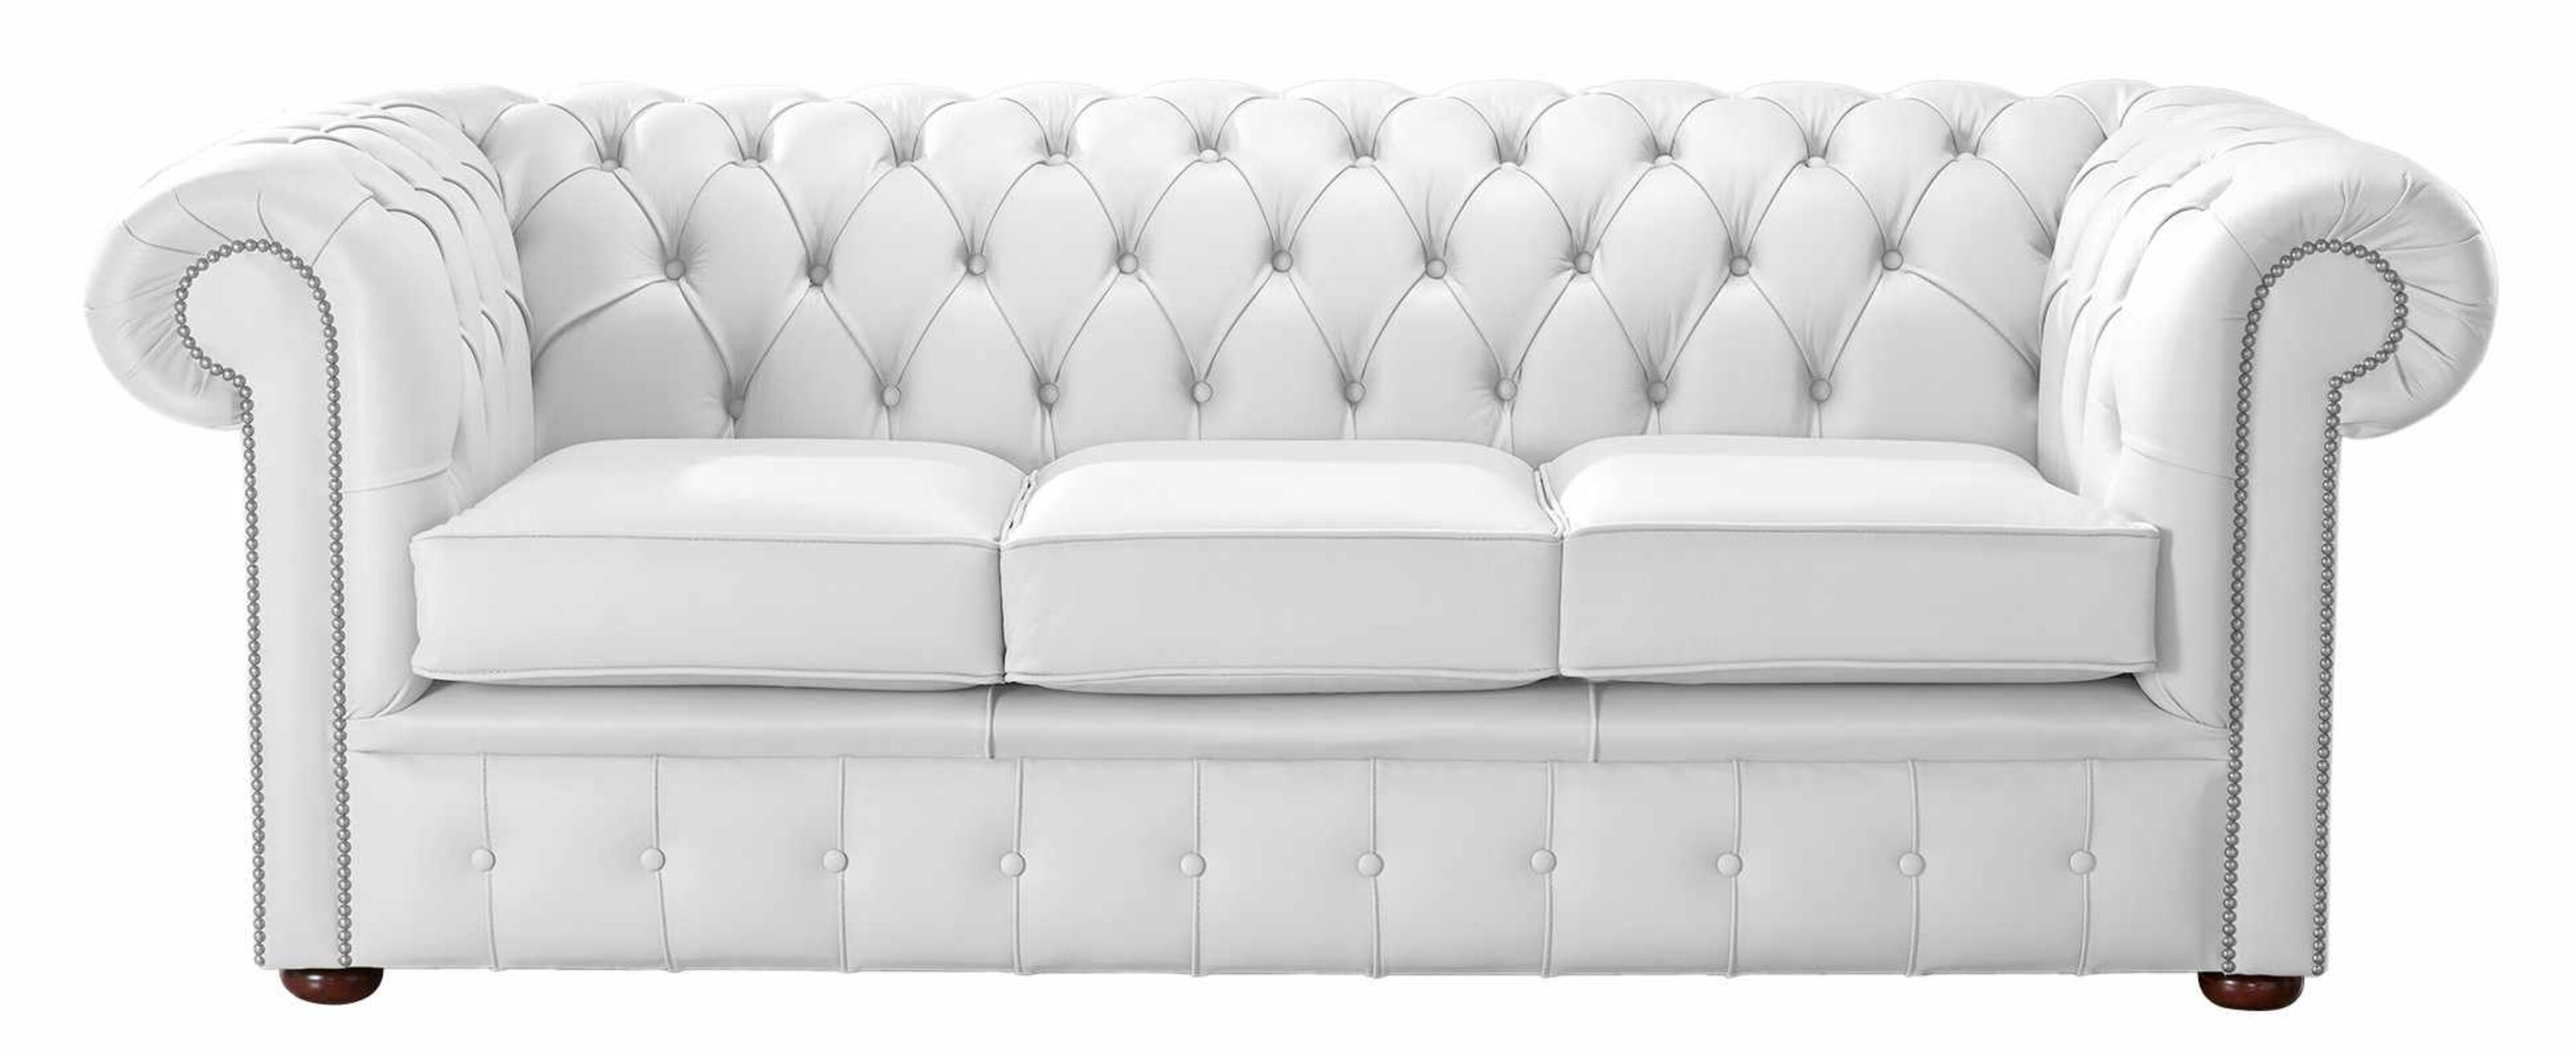 The Perks of Wholesale Chesterfield Sofa Shopping  %Post Title